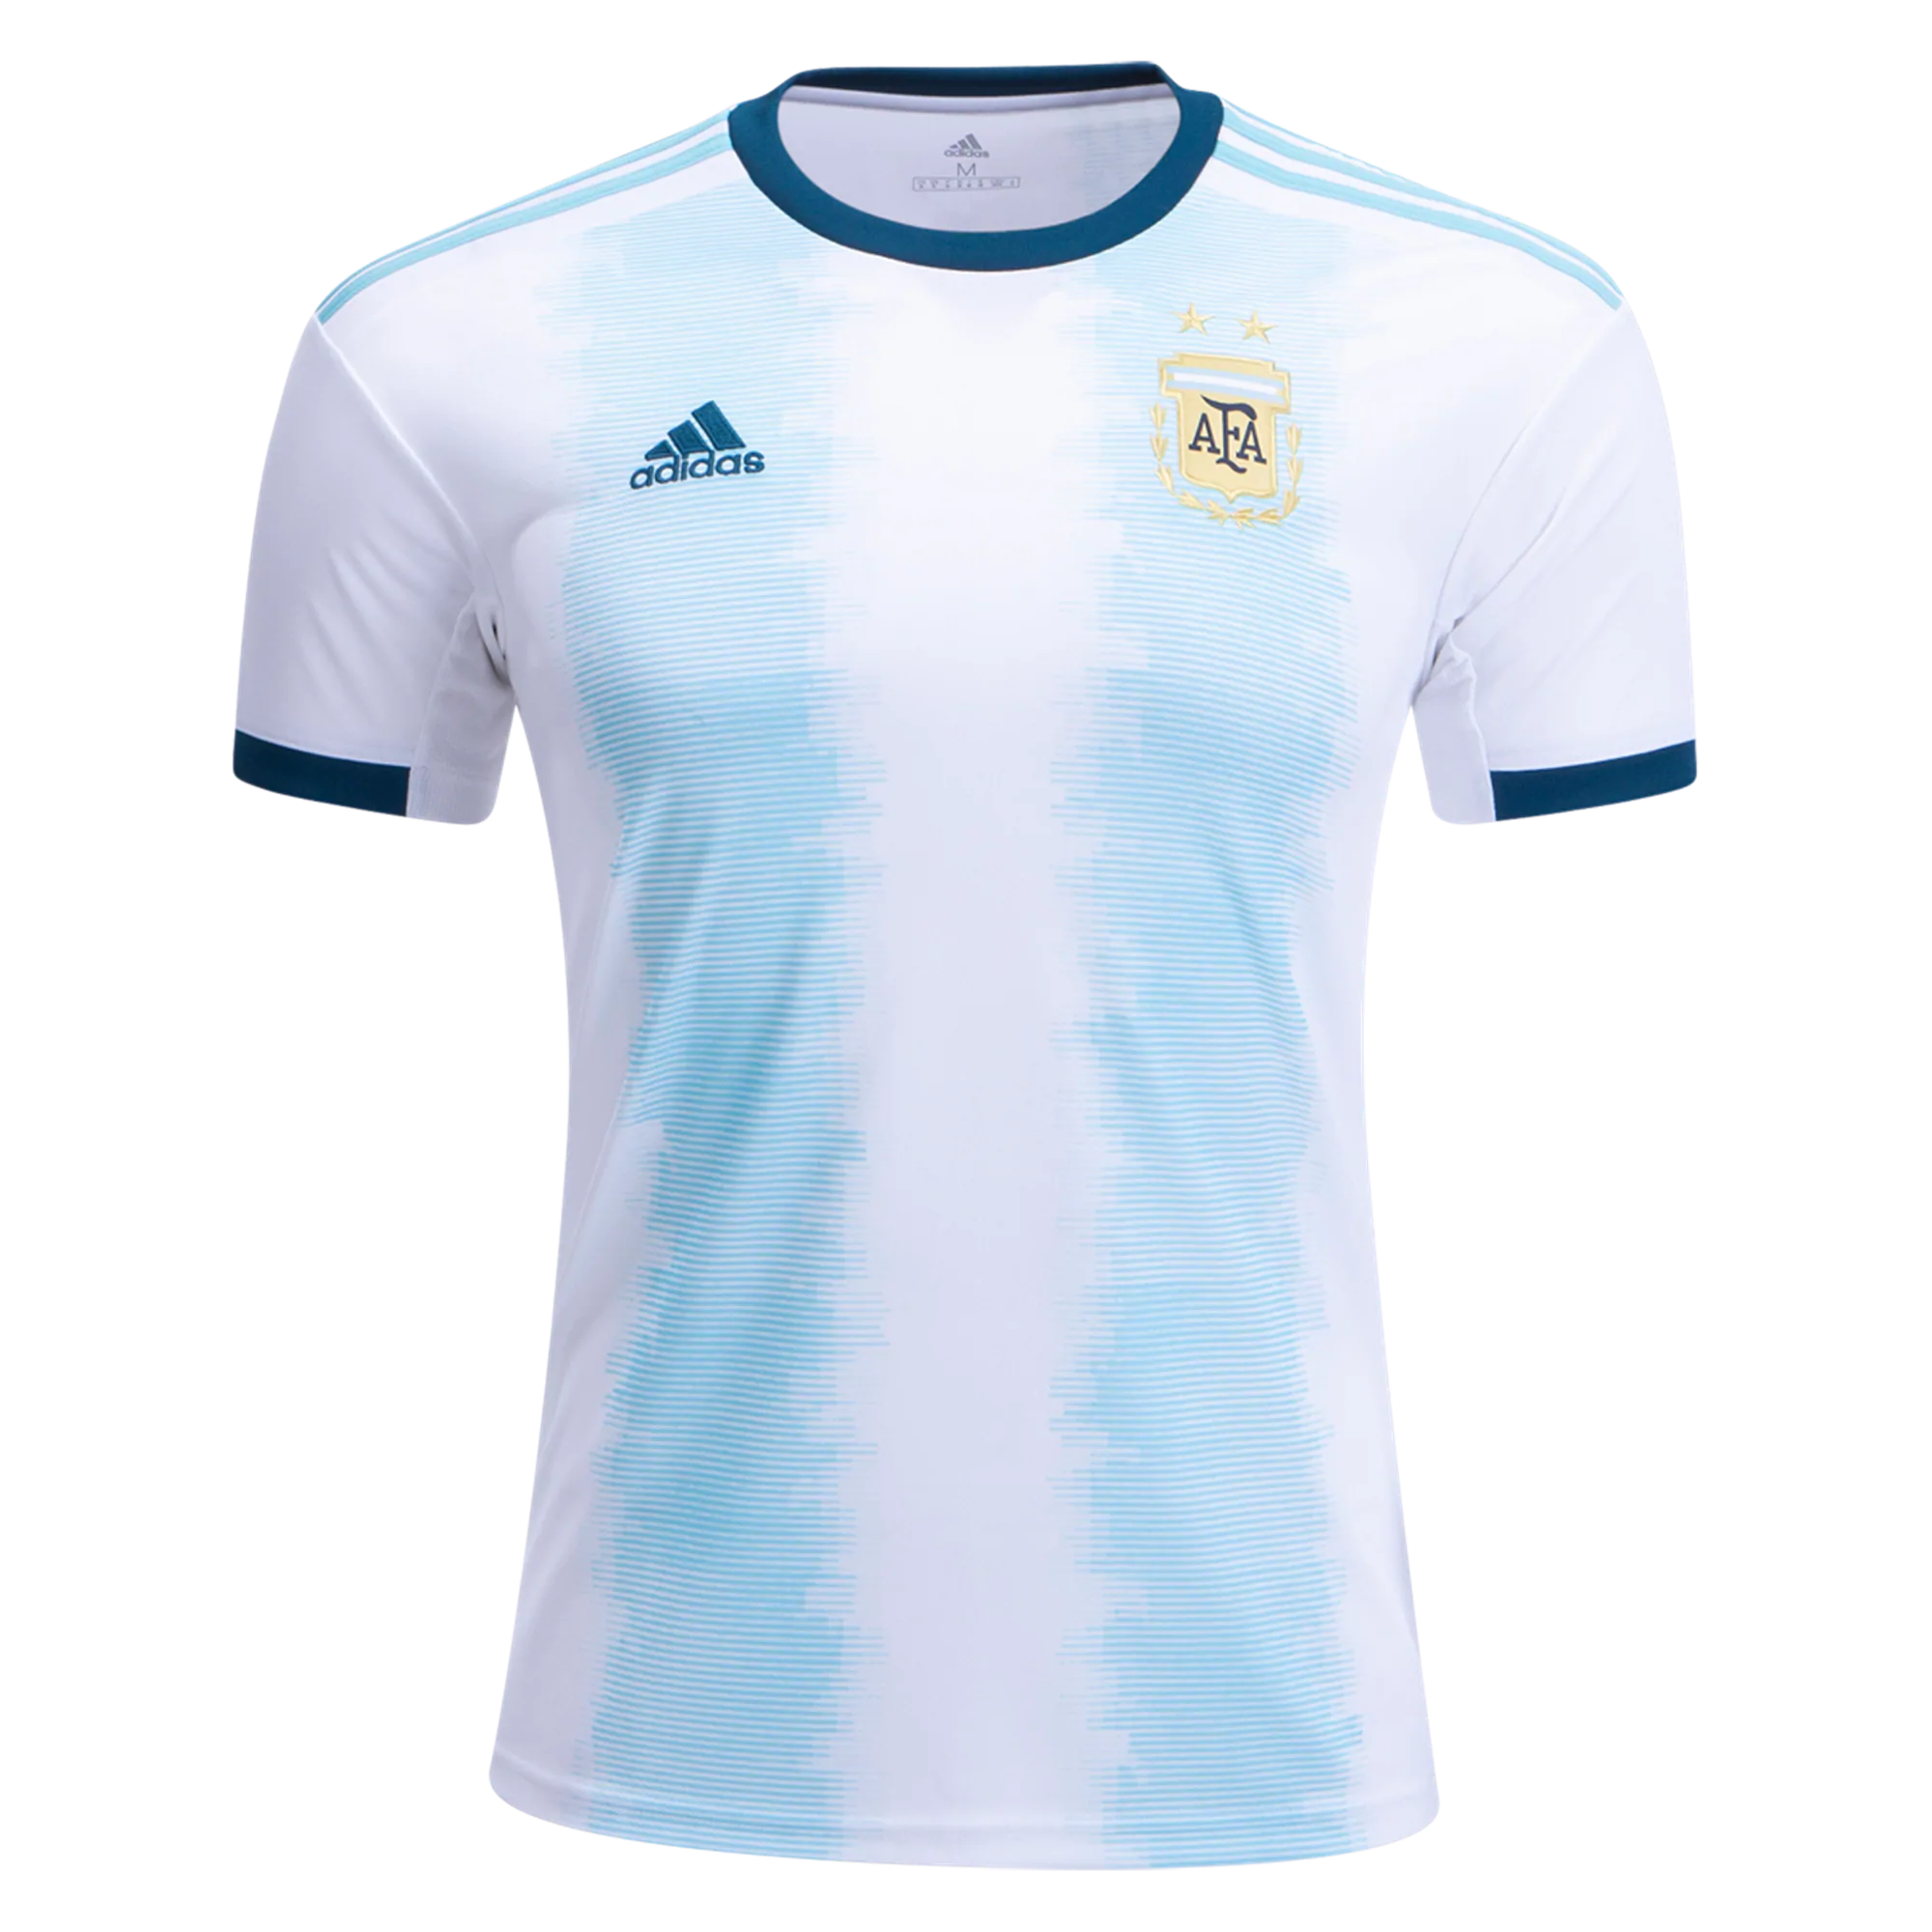 Arg Home Jersey – Mad About Soccer